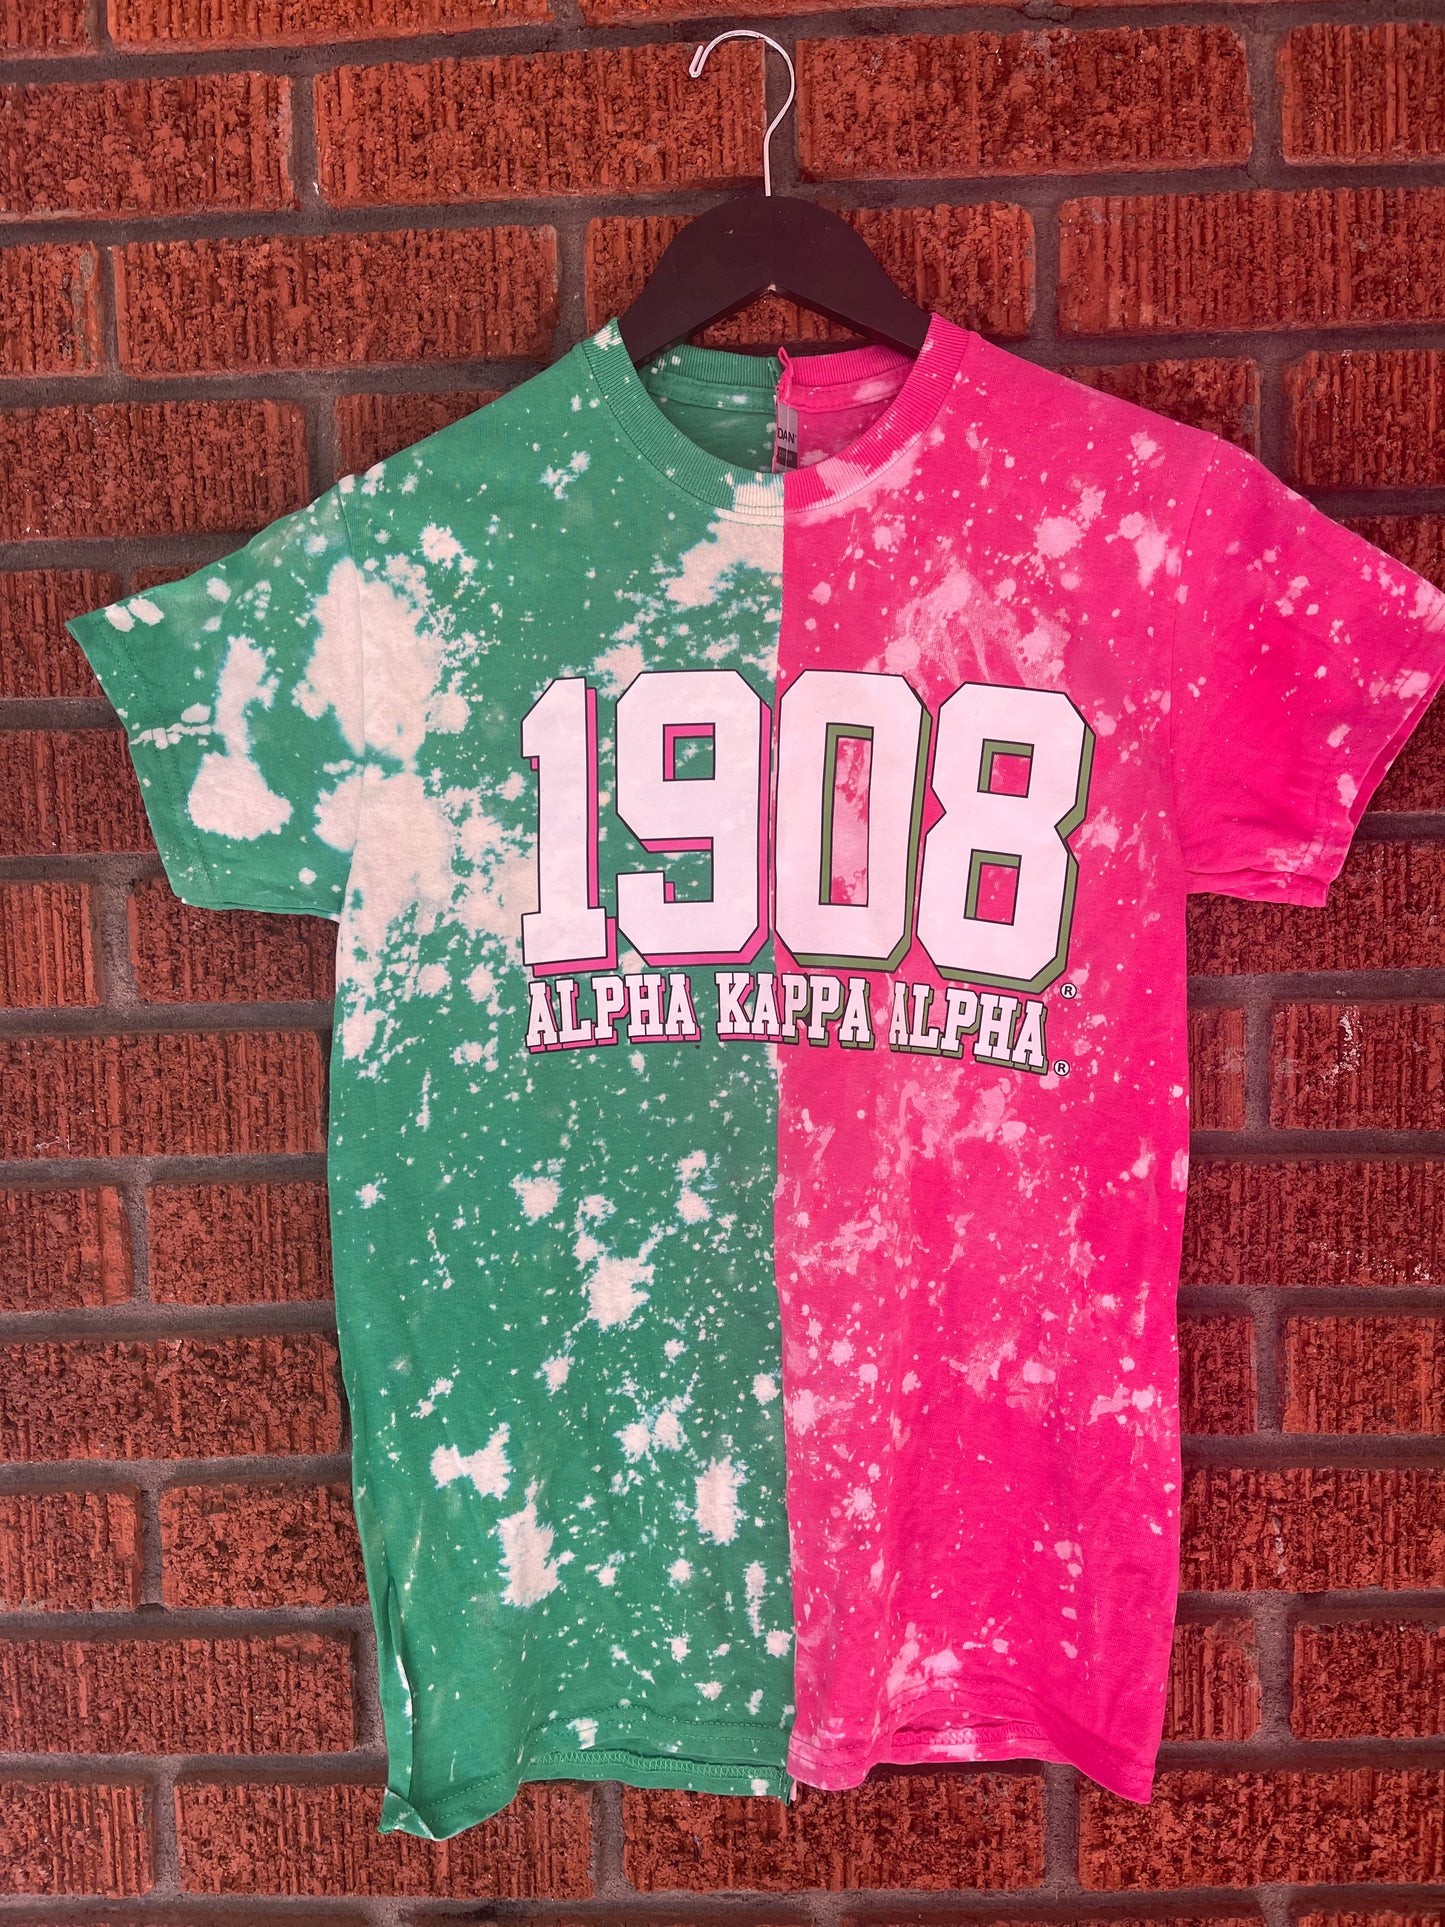 The 1908 AKA Hand-Bleached Half and Half Crew Neck T-shirt